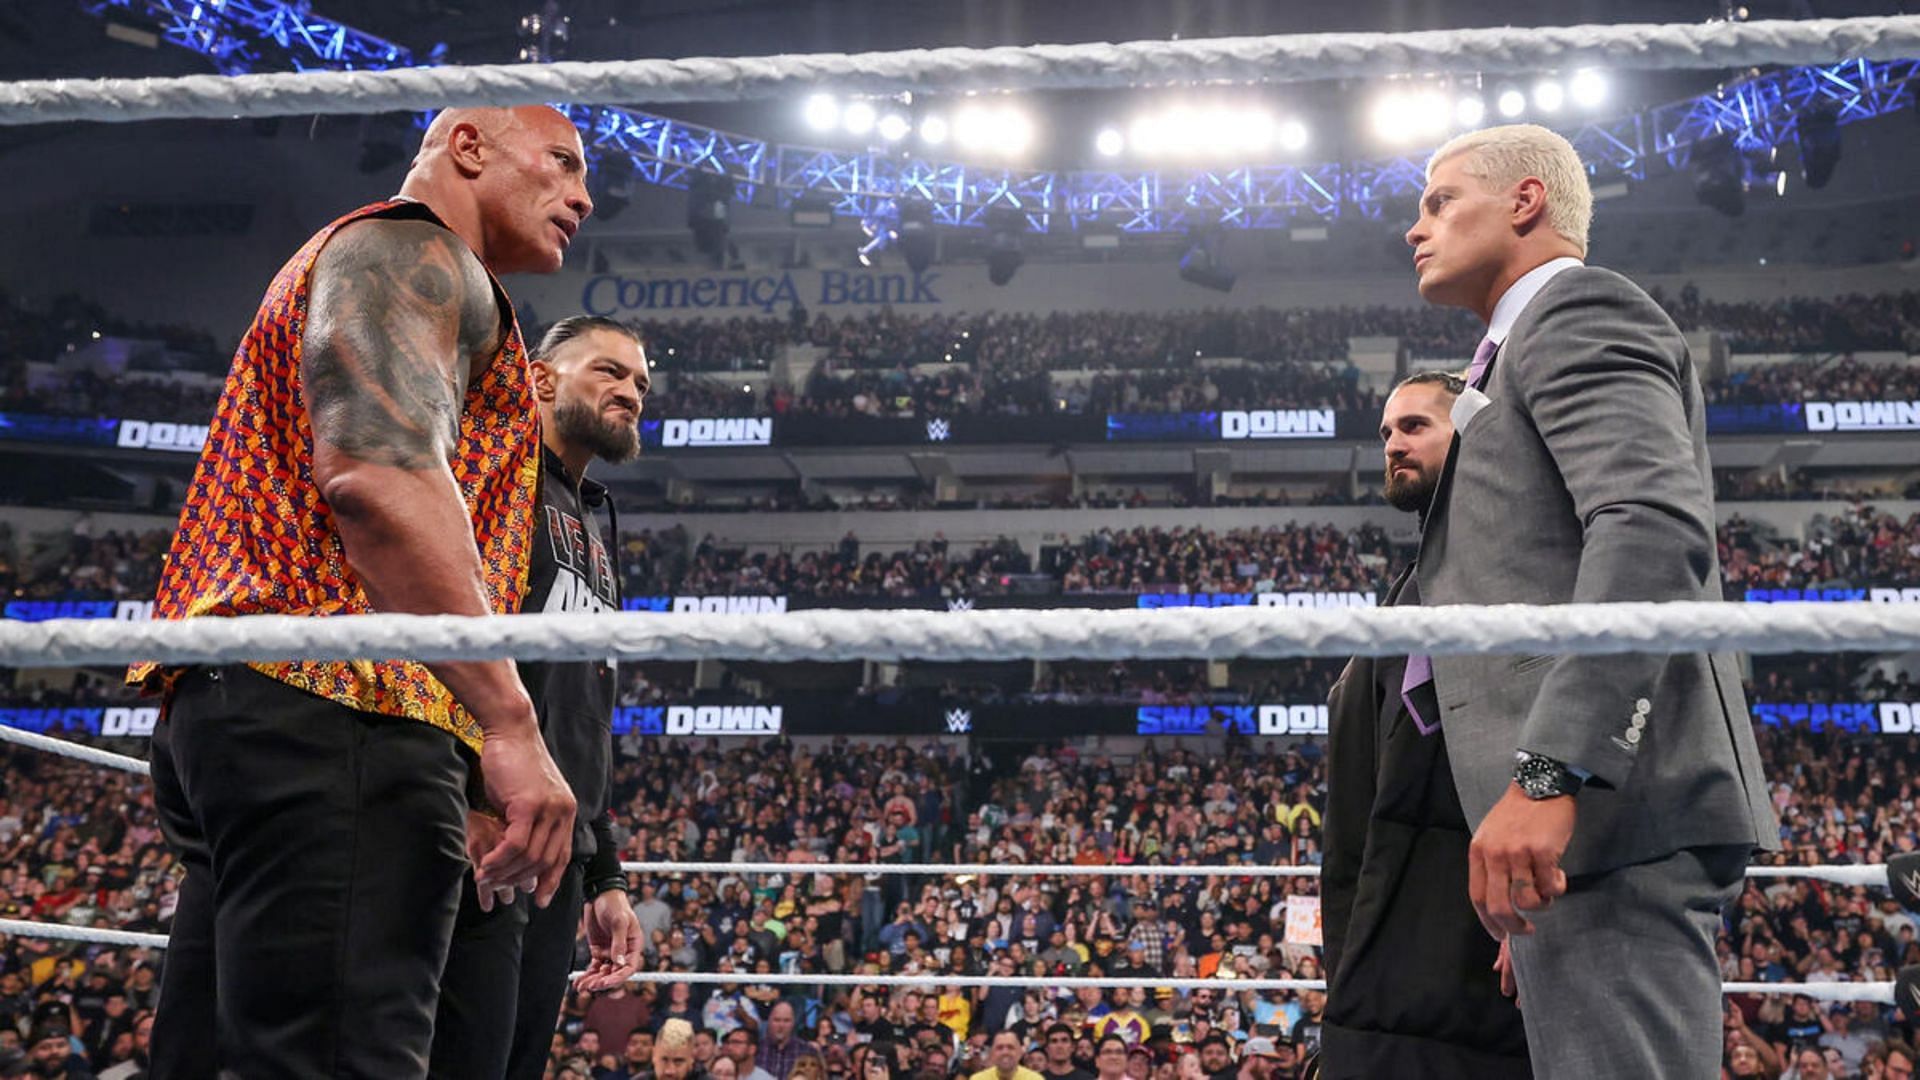 Roman Reigns and The Rock will face Cody Rhodes and Seth Rollins at WWE WrestleMania